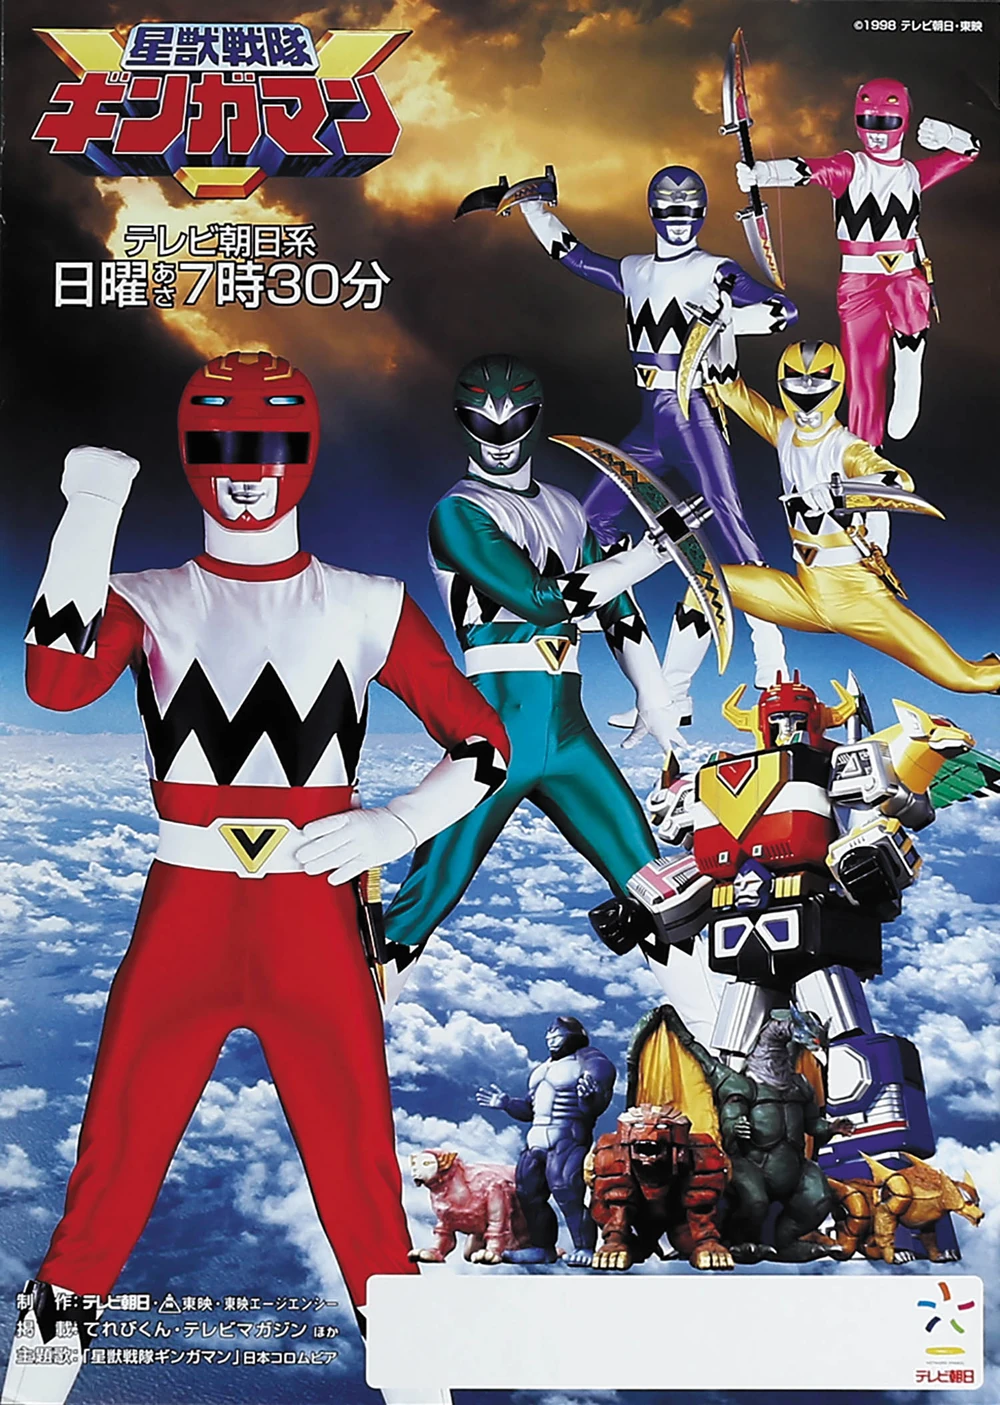 My Favorite Sentai Villains: The Space Pirates from GINGAMAN!